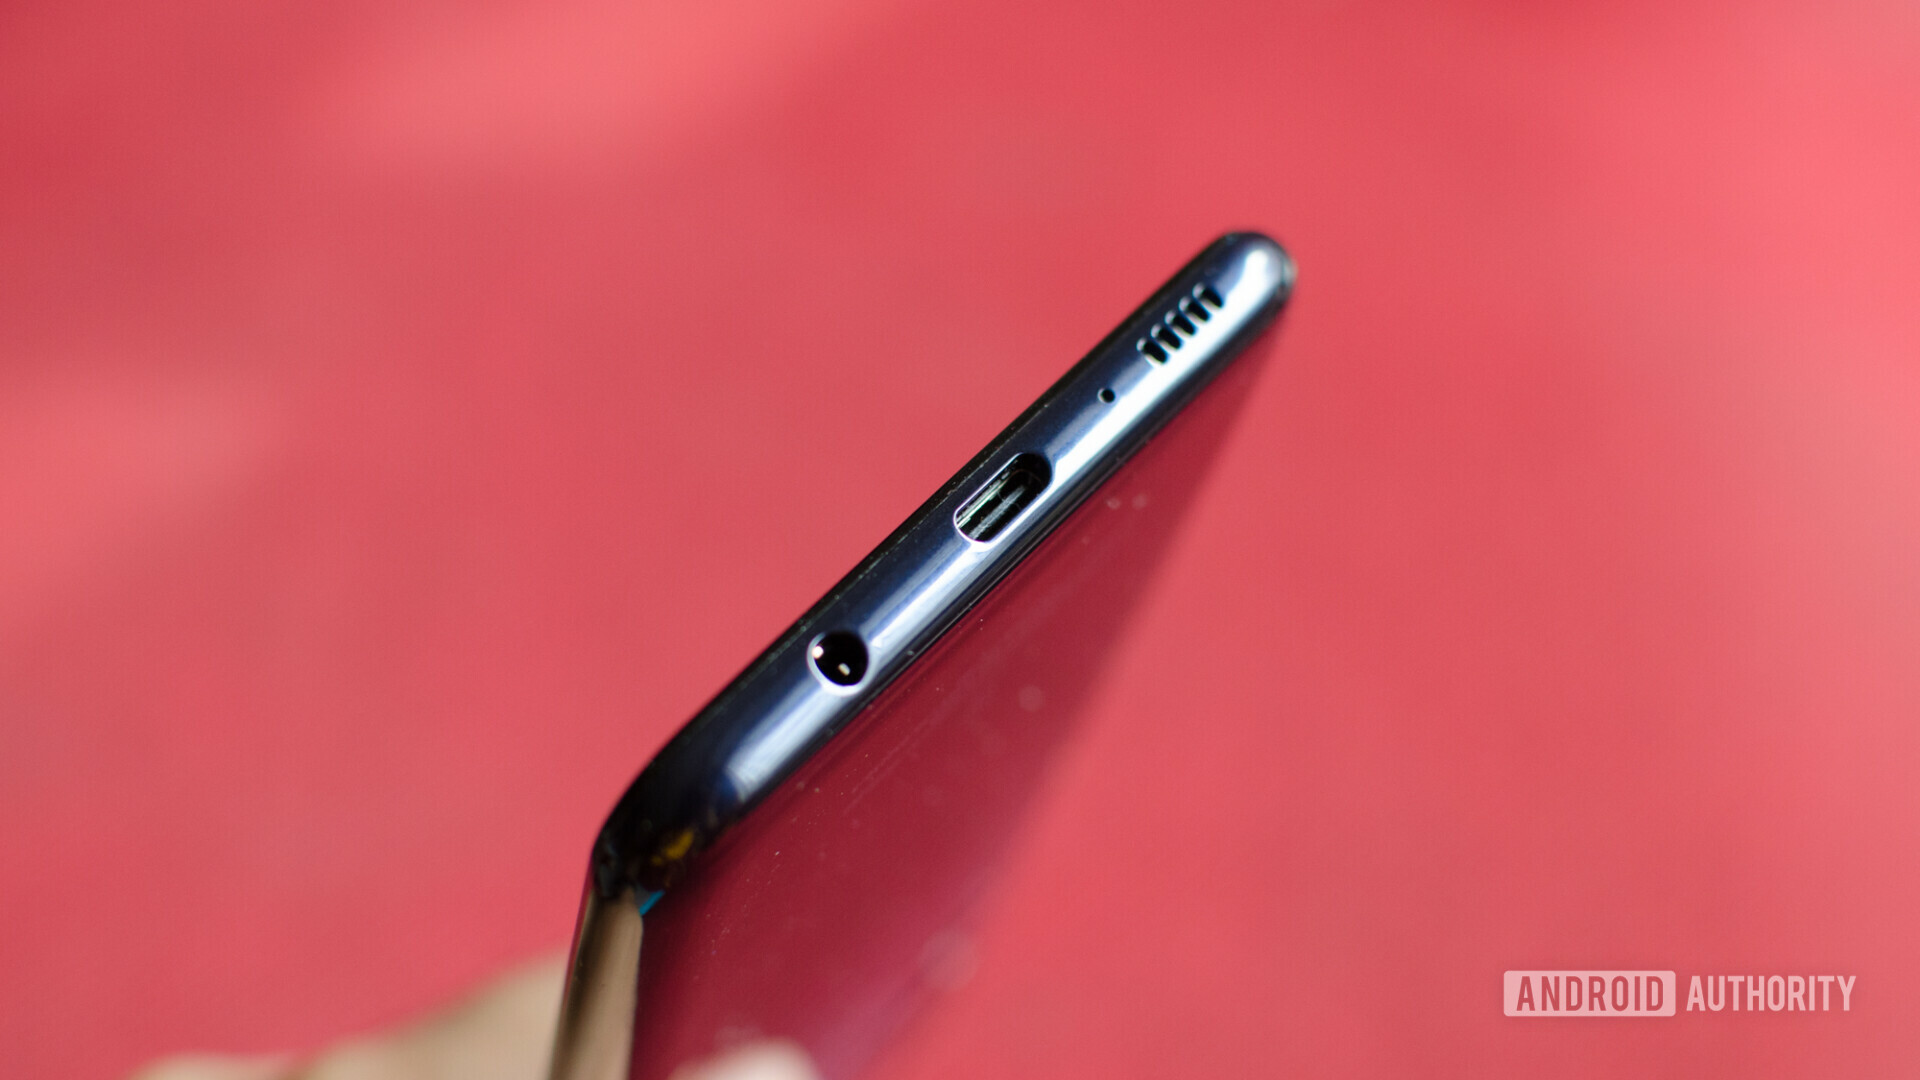 Bottom side of the Samsung Galaxy M30 showing the USB Type-C port and headphone jack.